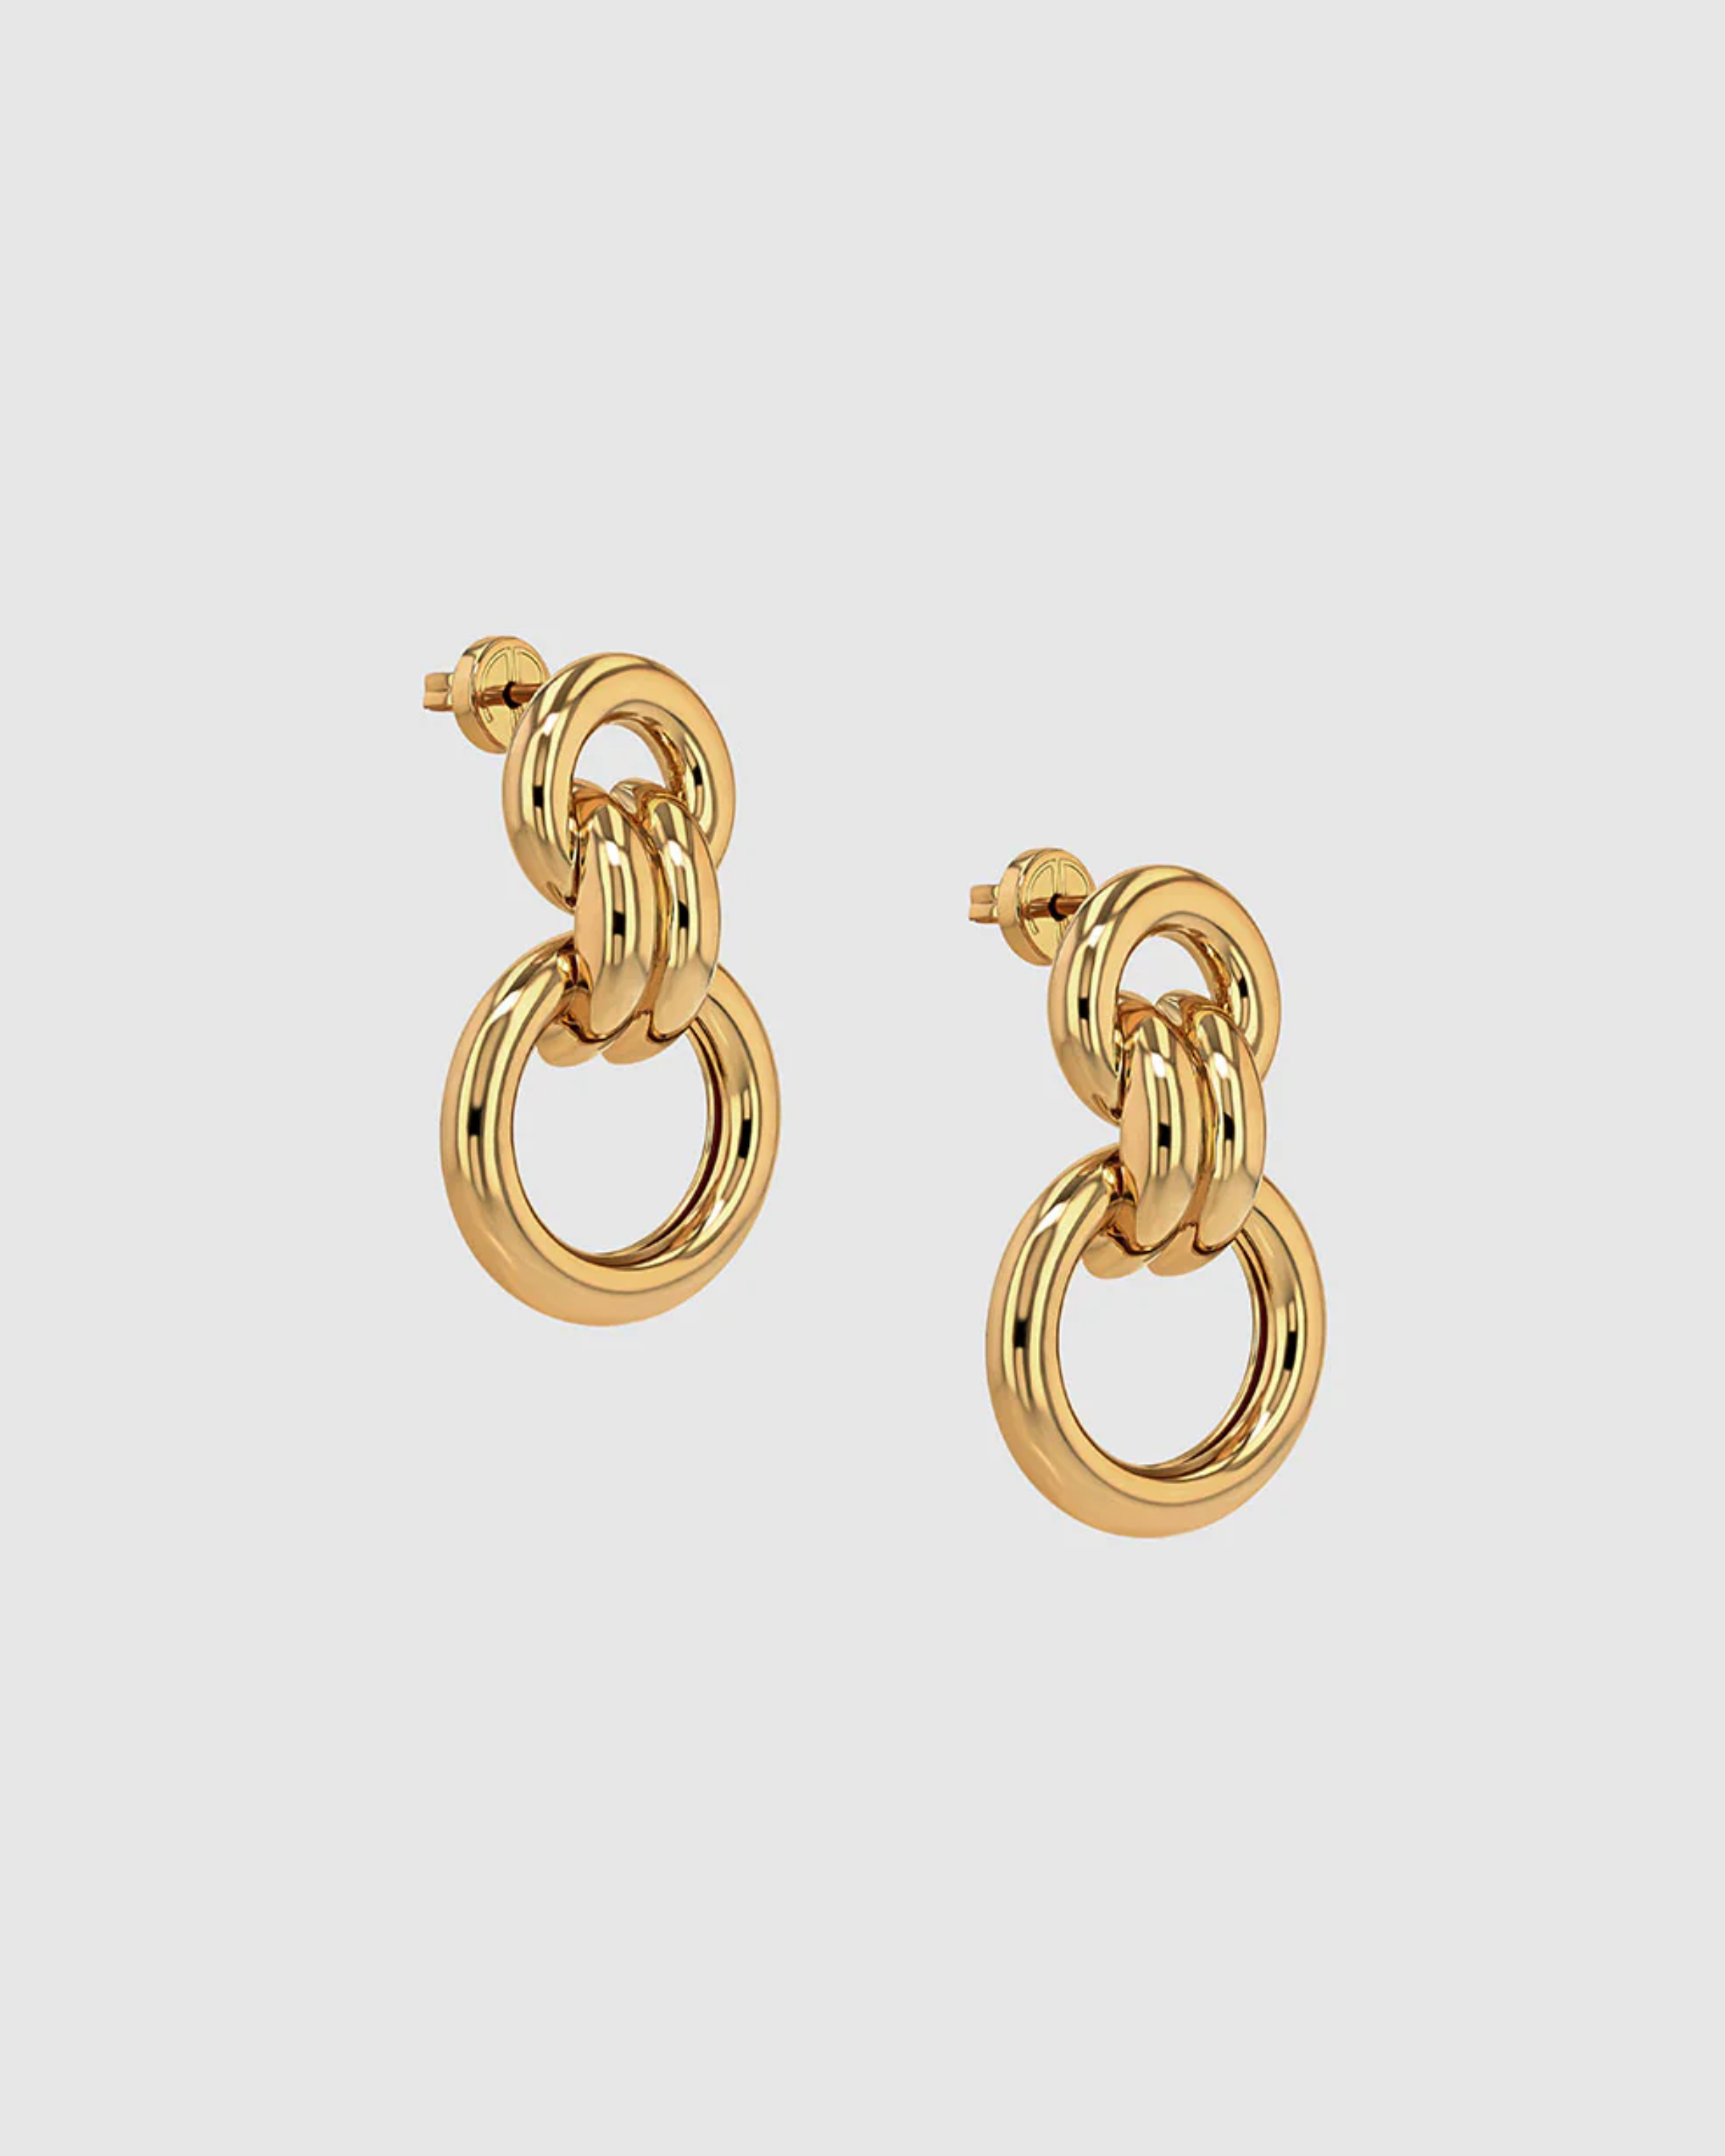 Anine Bing Round Link Drop Earring in Gold